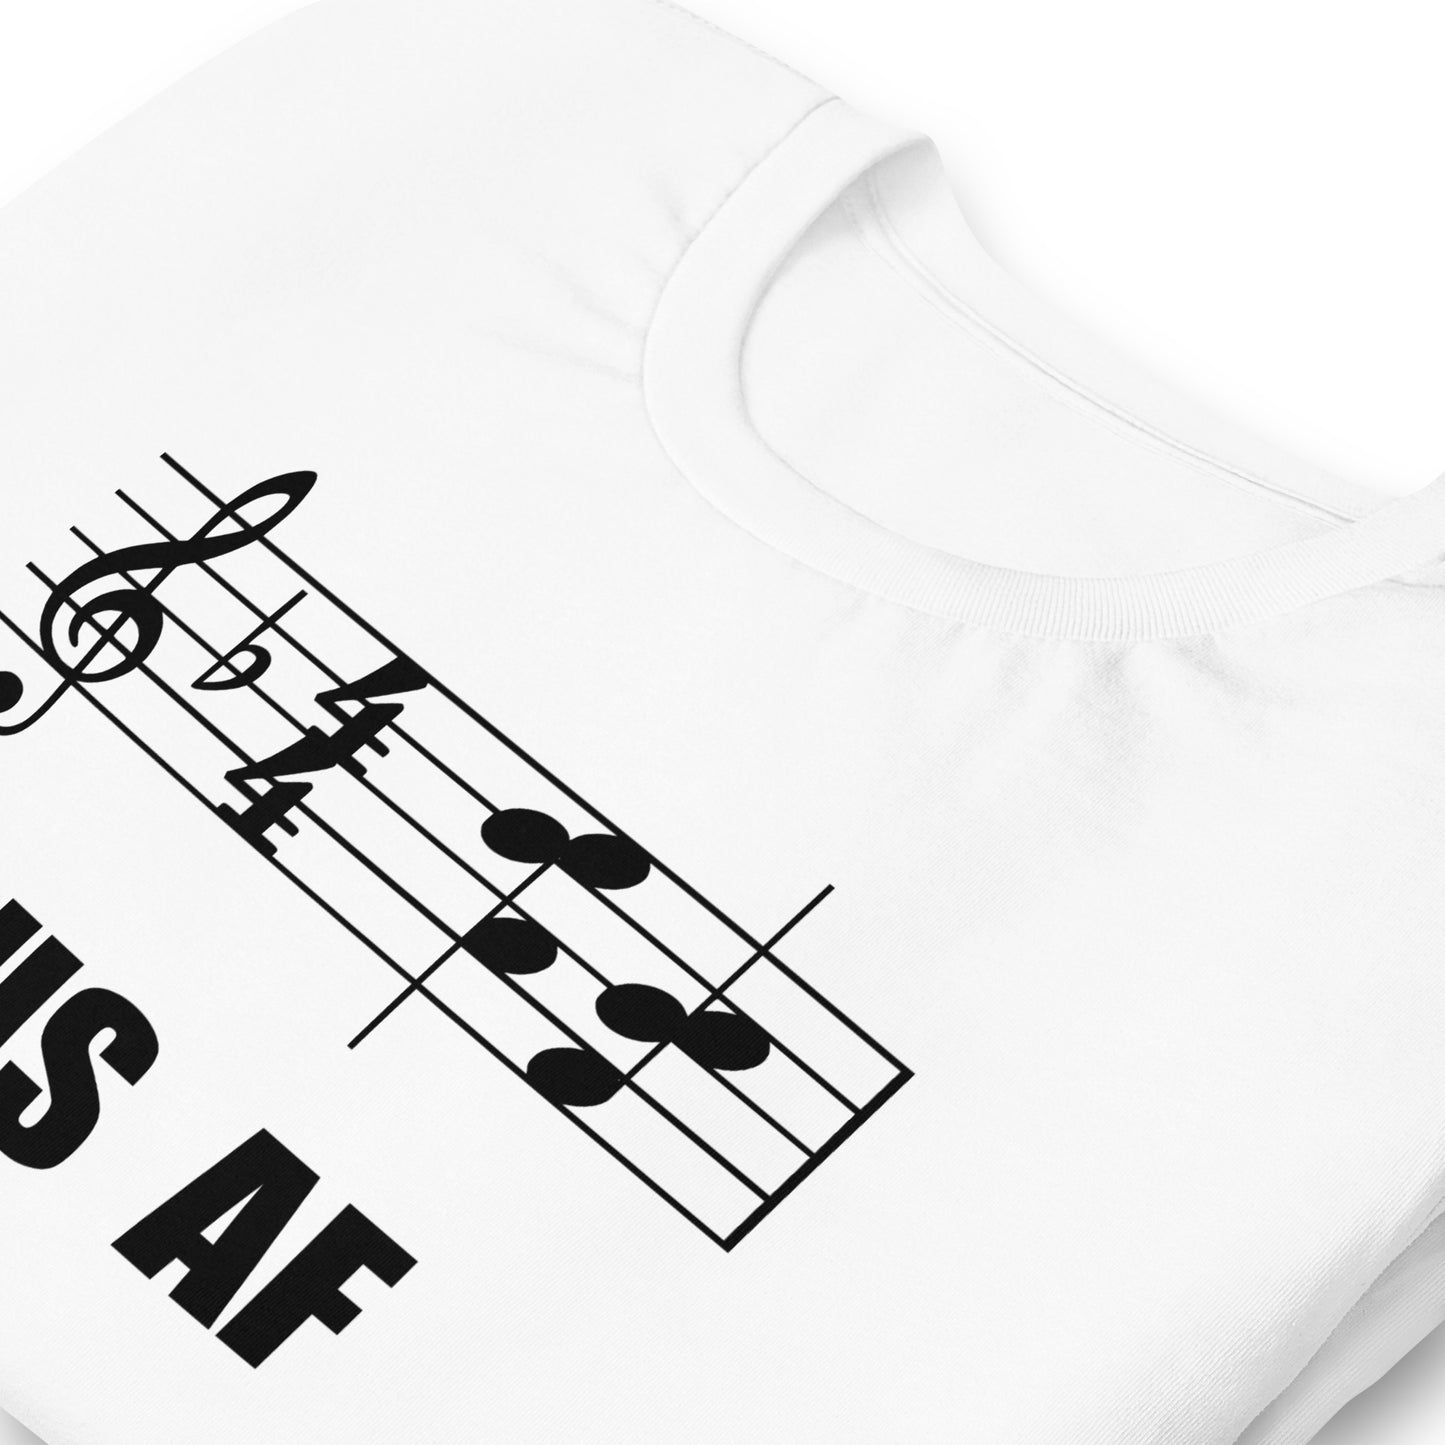 Funny Music Theory Suspended Chord T Shirt: SUS  AF - White